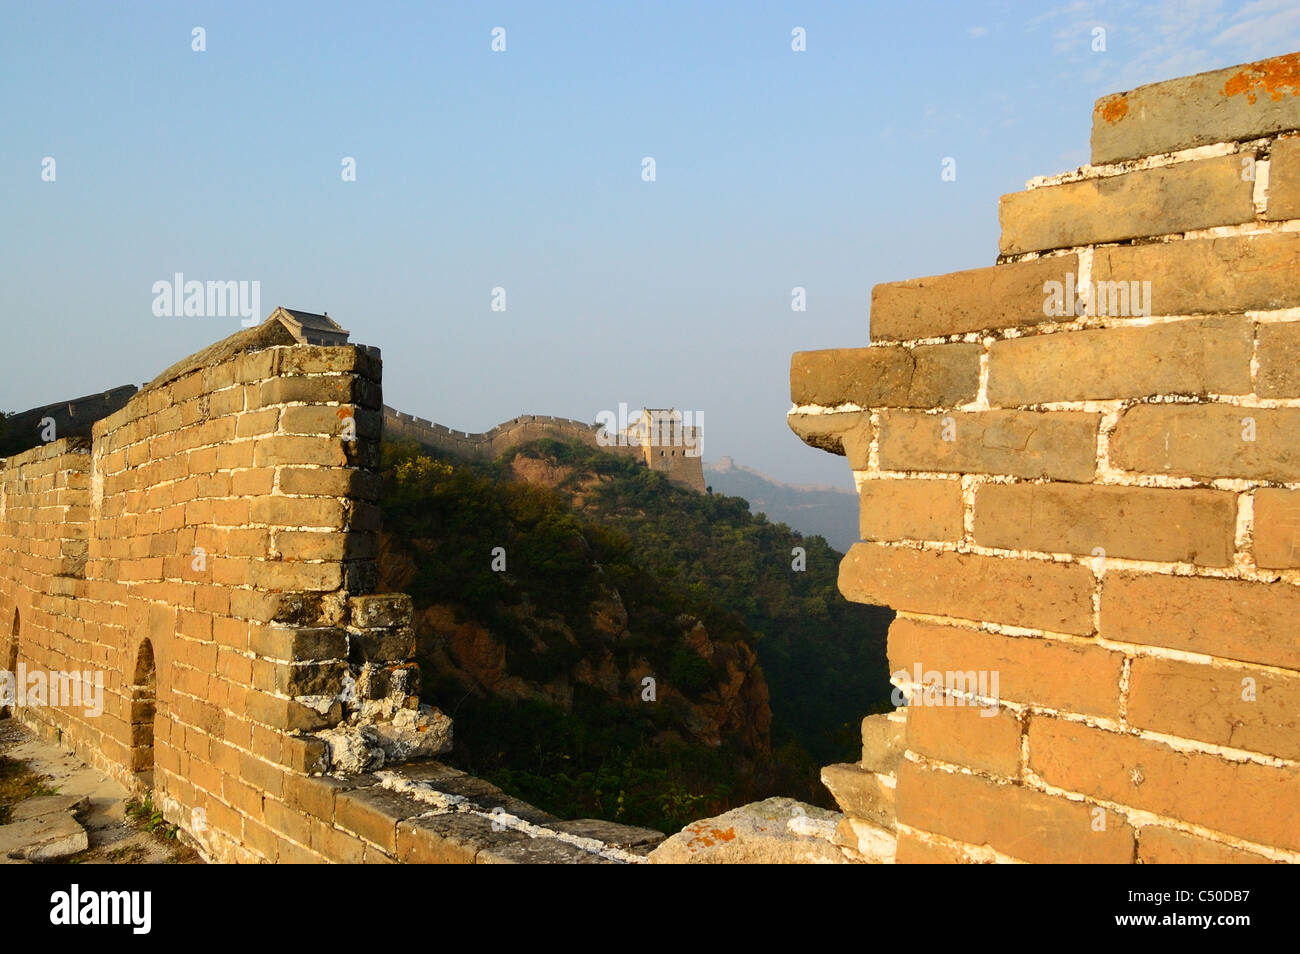 The Great Wall of China in Jinshanling, Hebei Province, China Stock Photo